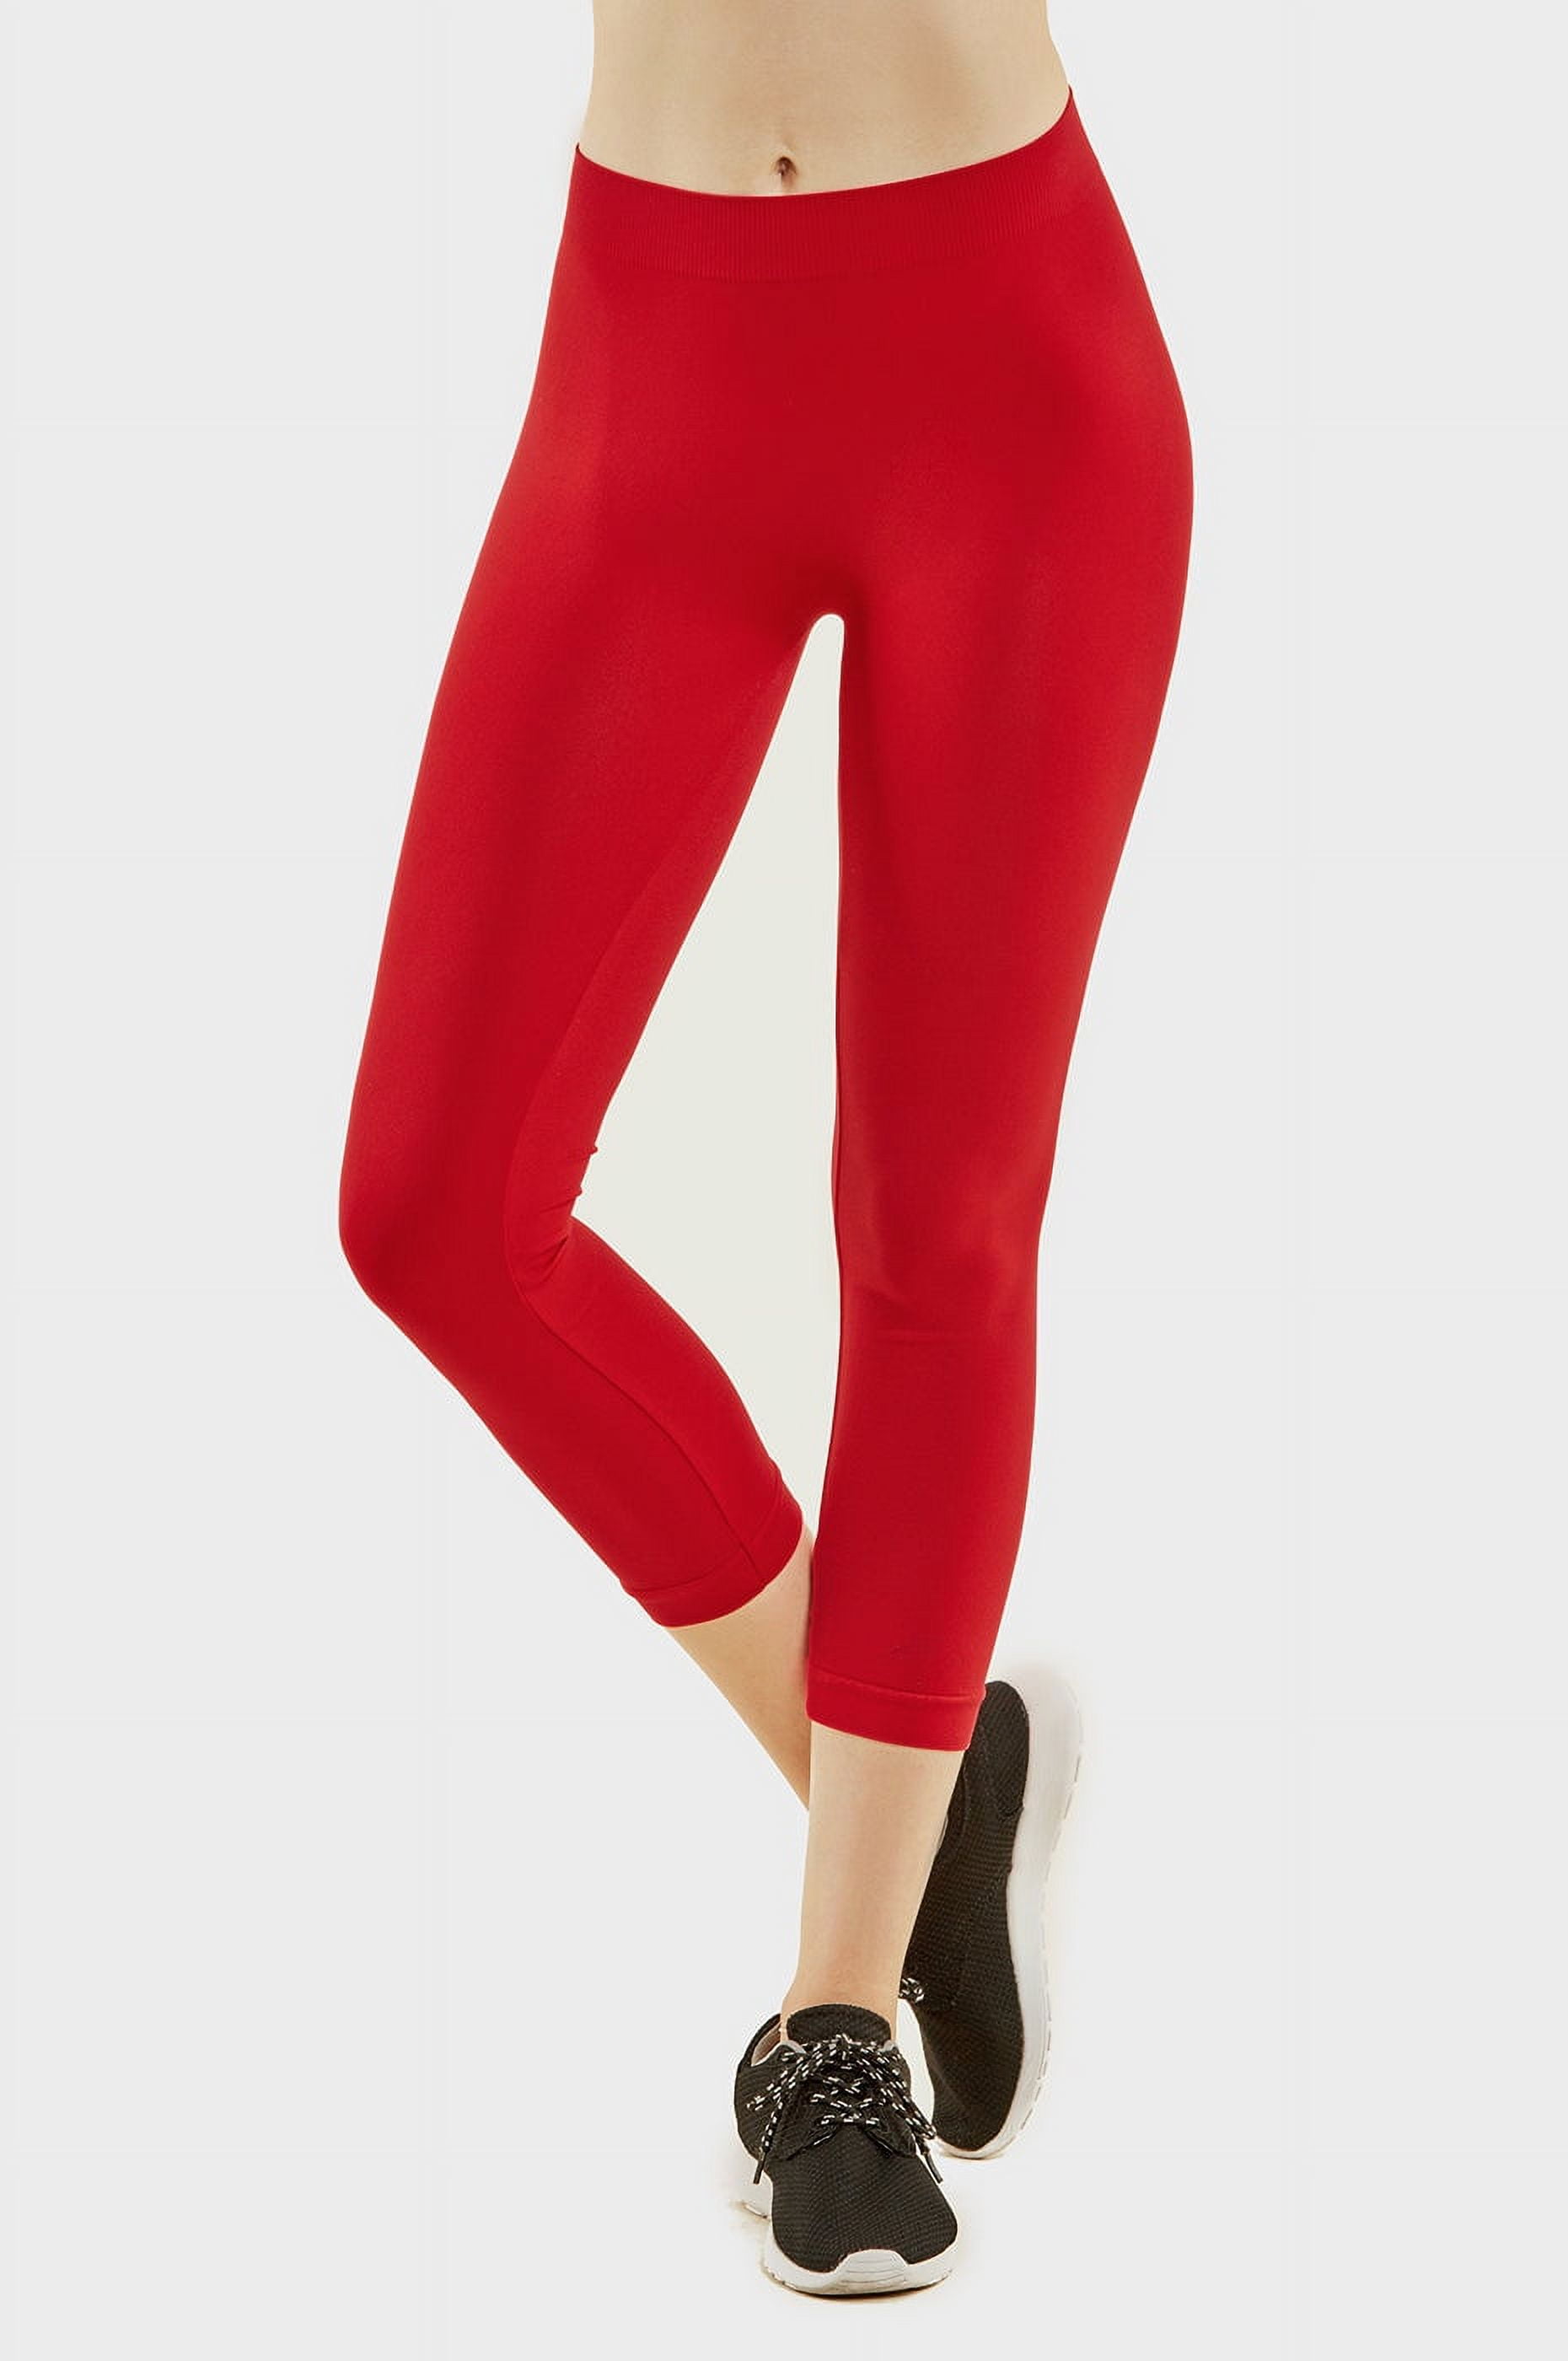 247 Frenzy Women's Active Essentials MOPAS Soft Stretch Nylon Blend Unlined  Capri Length Leggings with Ribbed Elastic Waistband - Red 